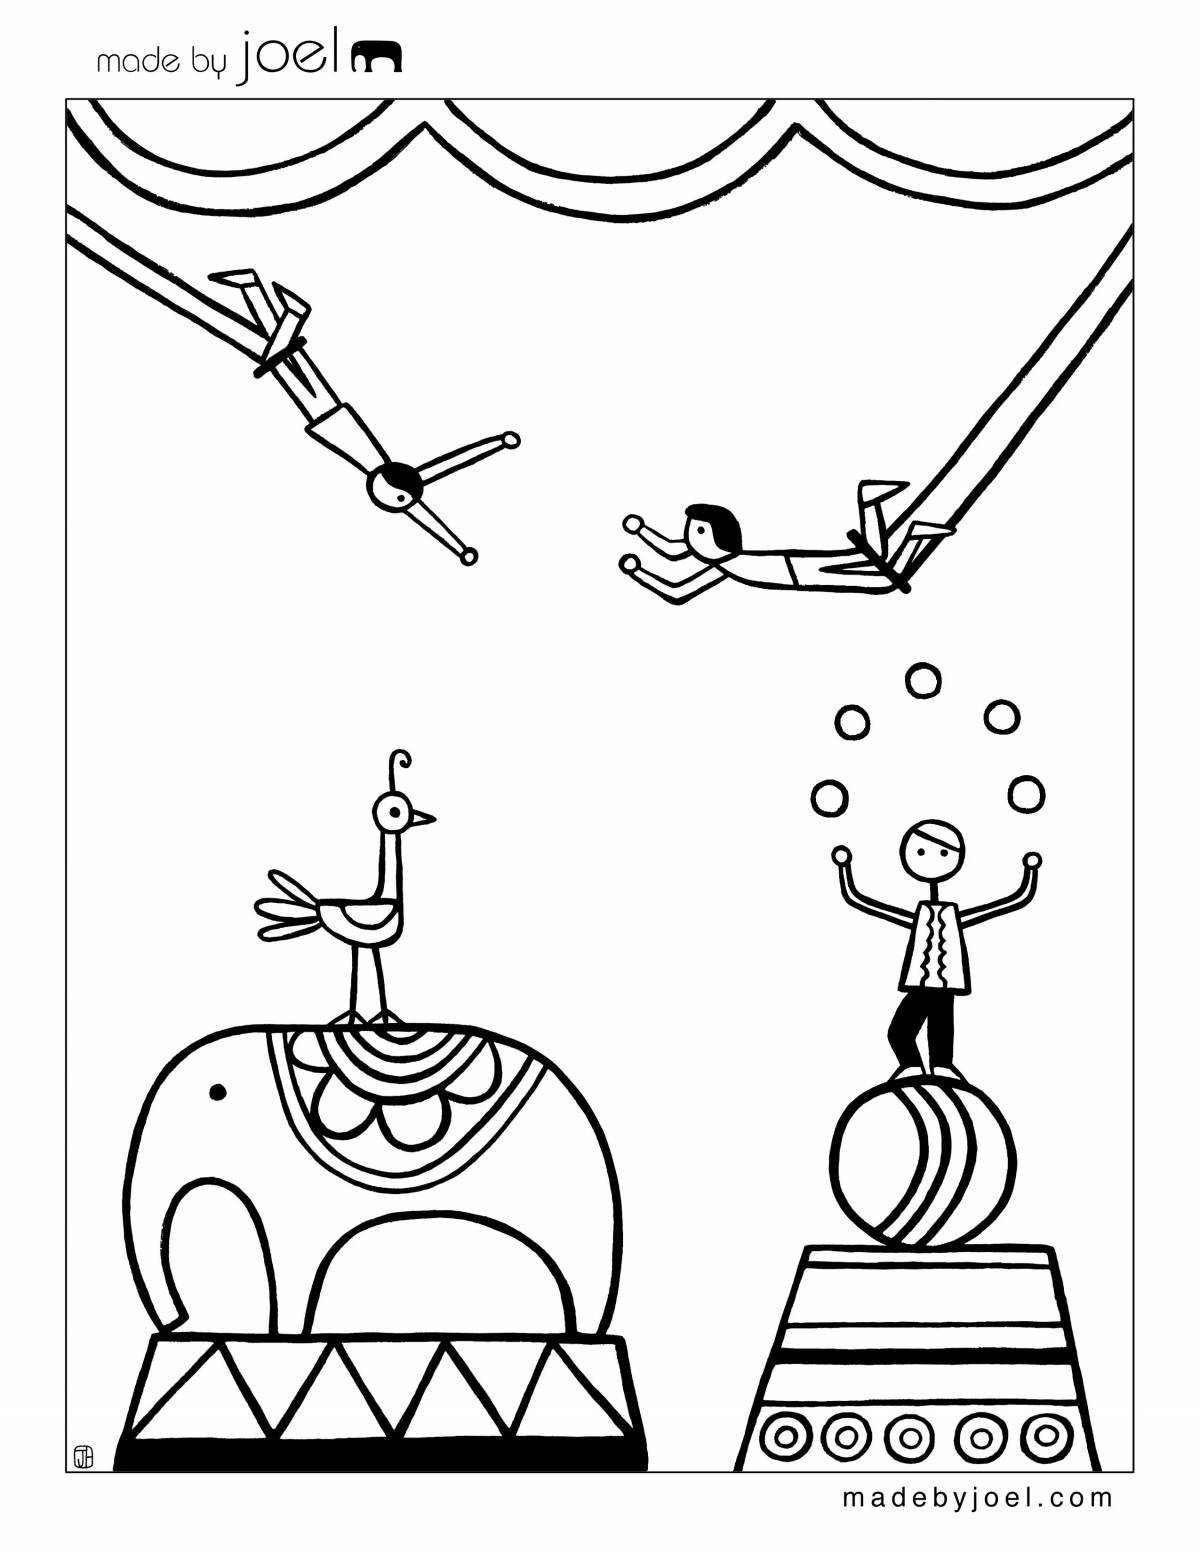 Exciting circus arena coloring page